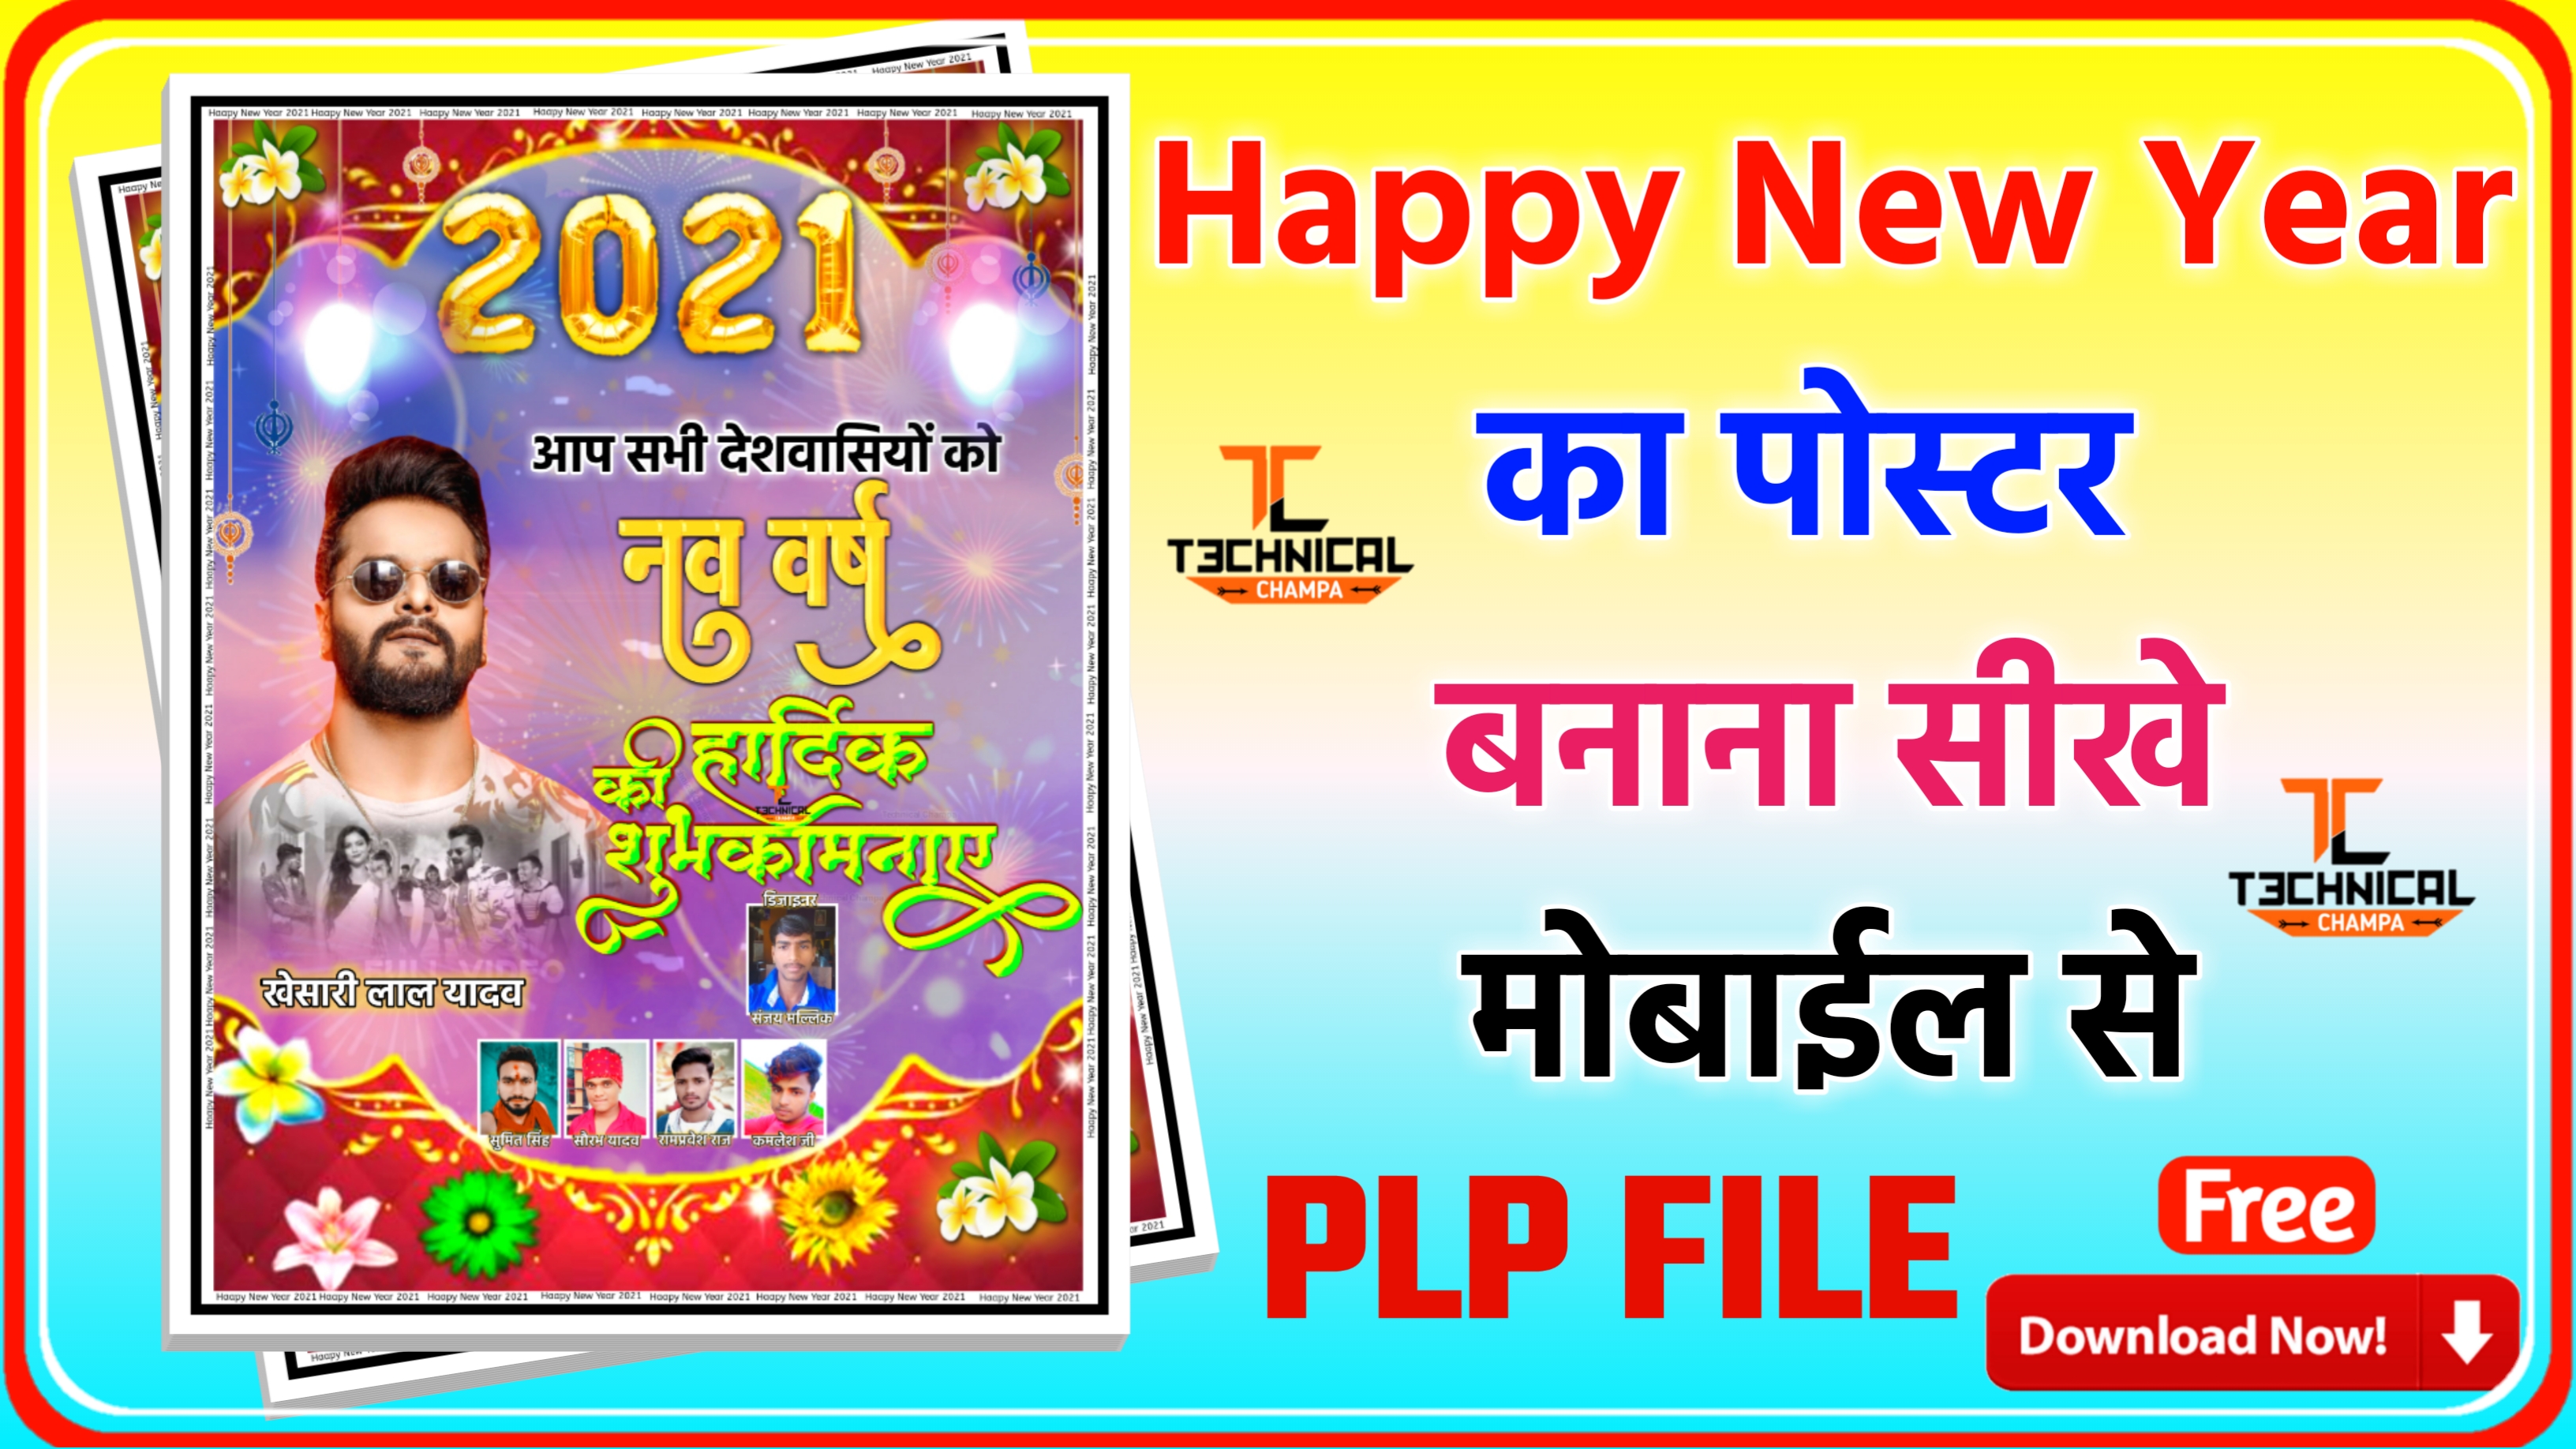 Happy New Year 2021 Poster PLP File Download Technical Champa